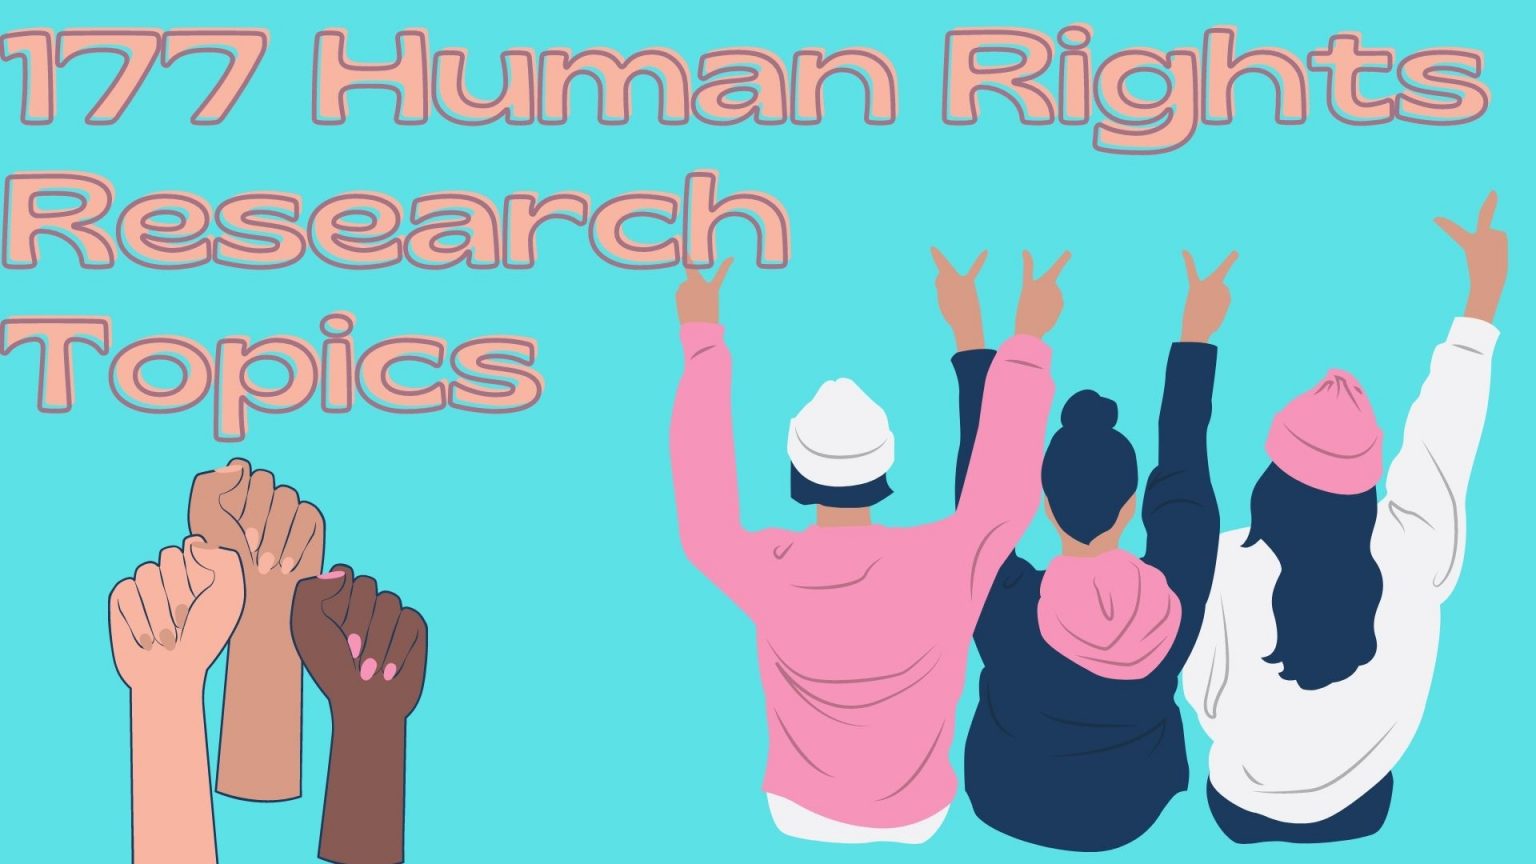 research topics on human rights